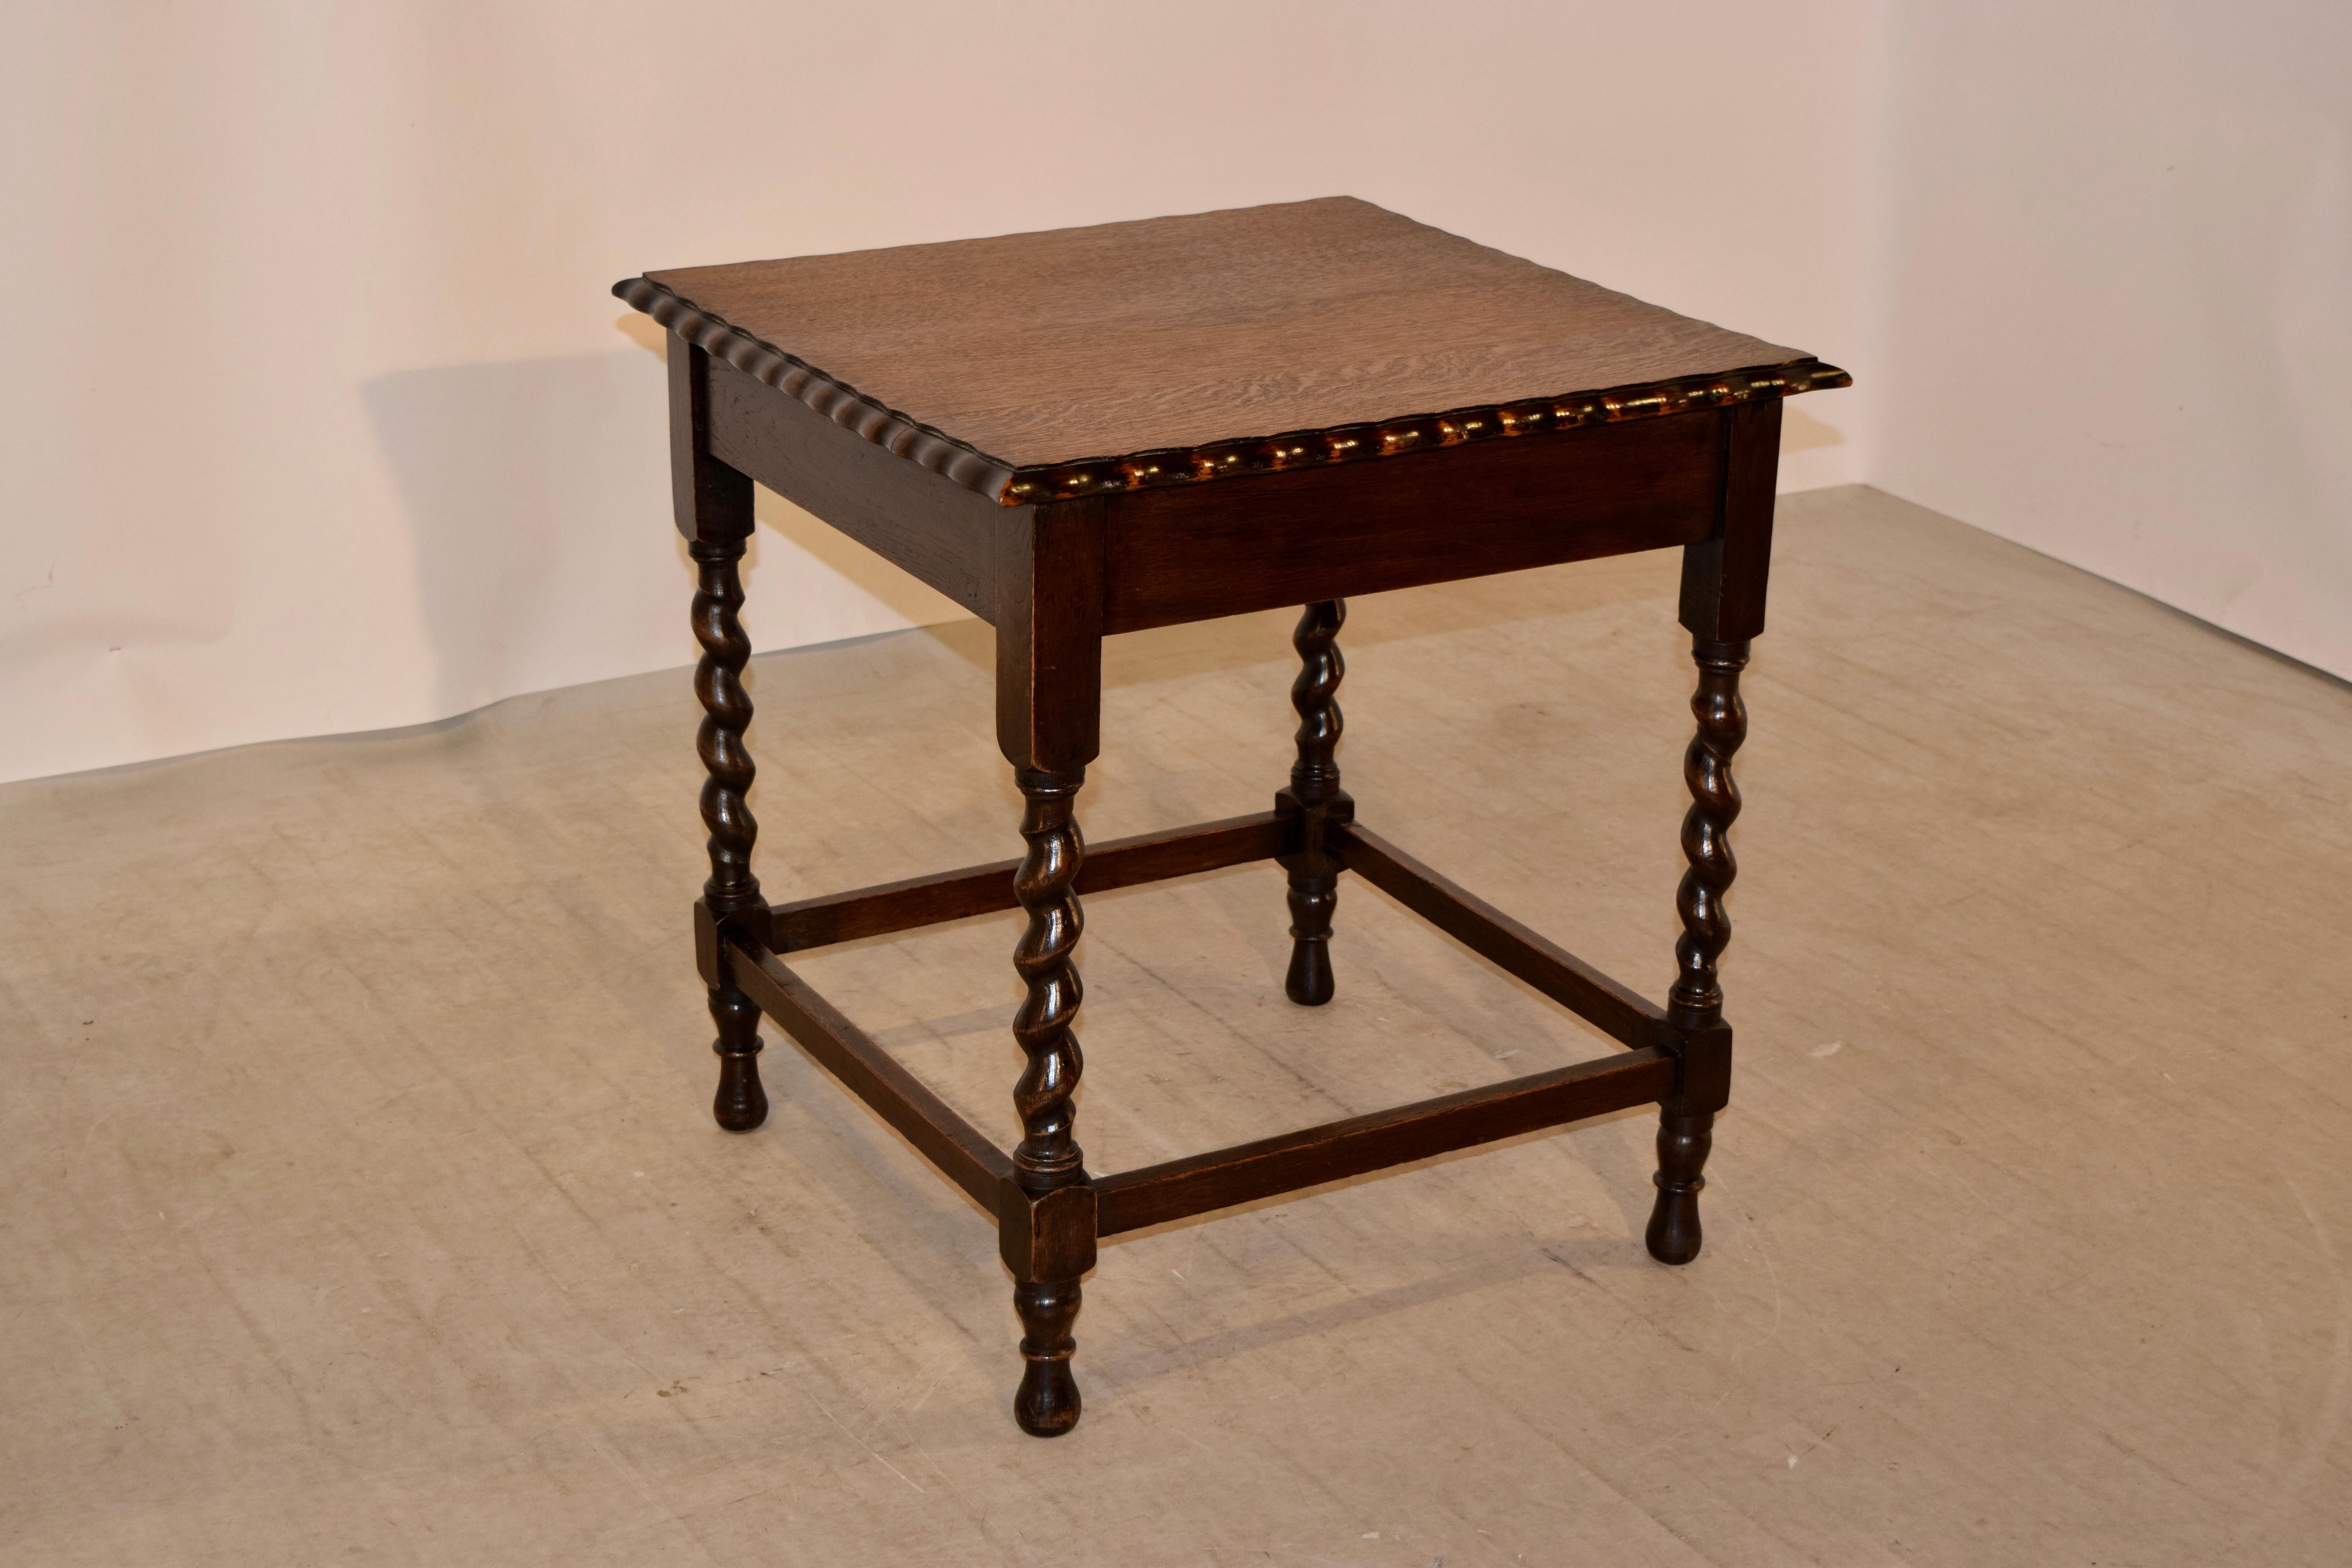 19th century oversized oak occasional table from England. The top has a scalloped and bevelled edge following down to a simple apron and supported on hand-turned barley twist legs joined by stretchers and raised on hand-turned feet.